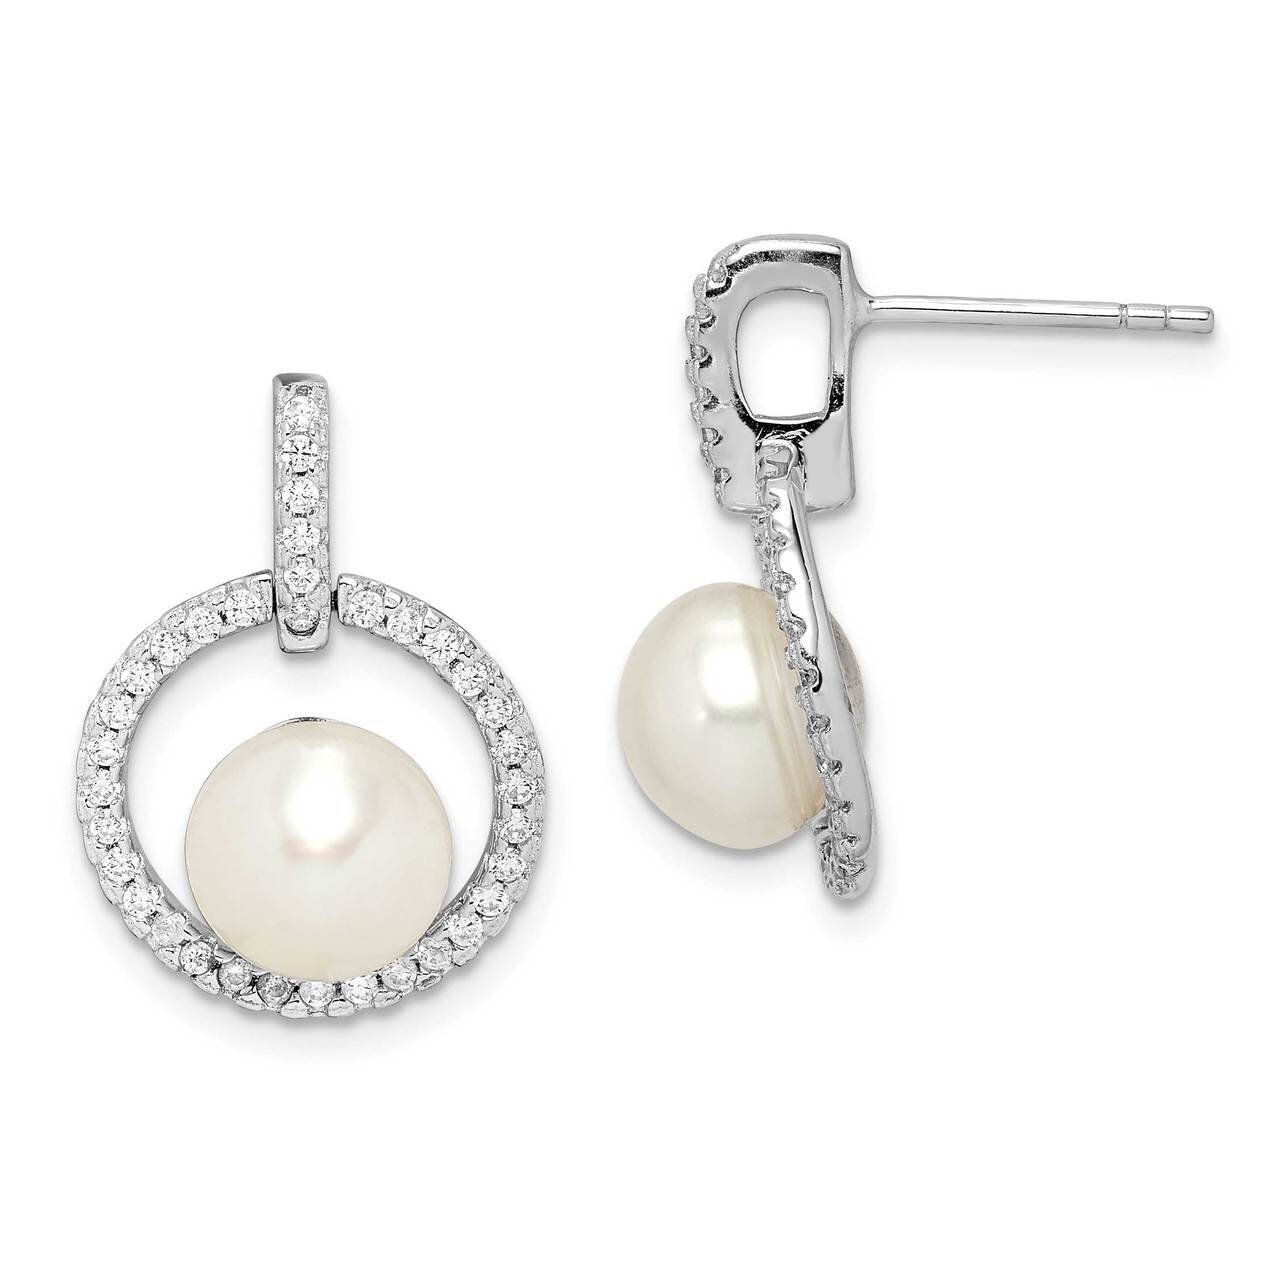 8-9mm White Button Freshwater Cultured Pearl CZ Diamond Earrings Sterling Silver Rhodium Plated QE15264